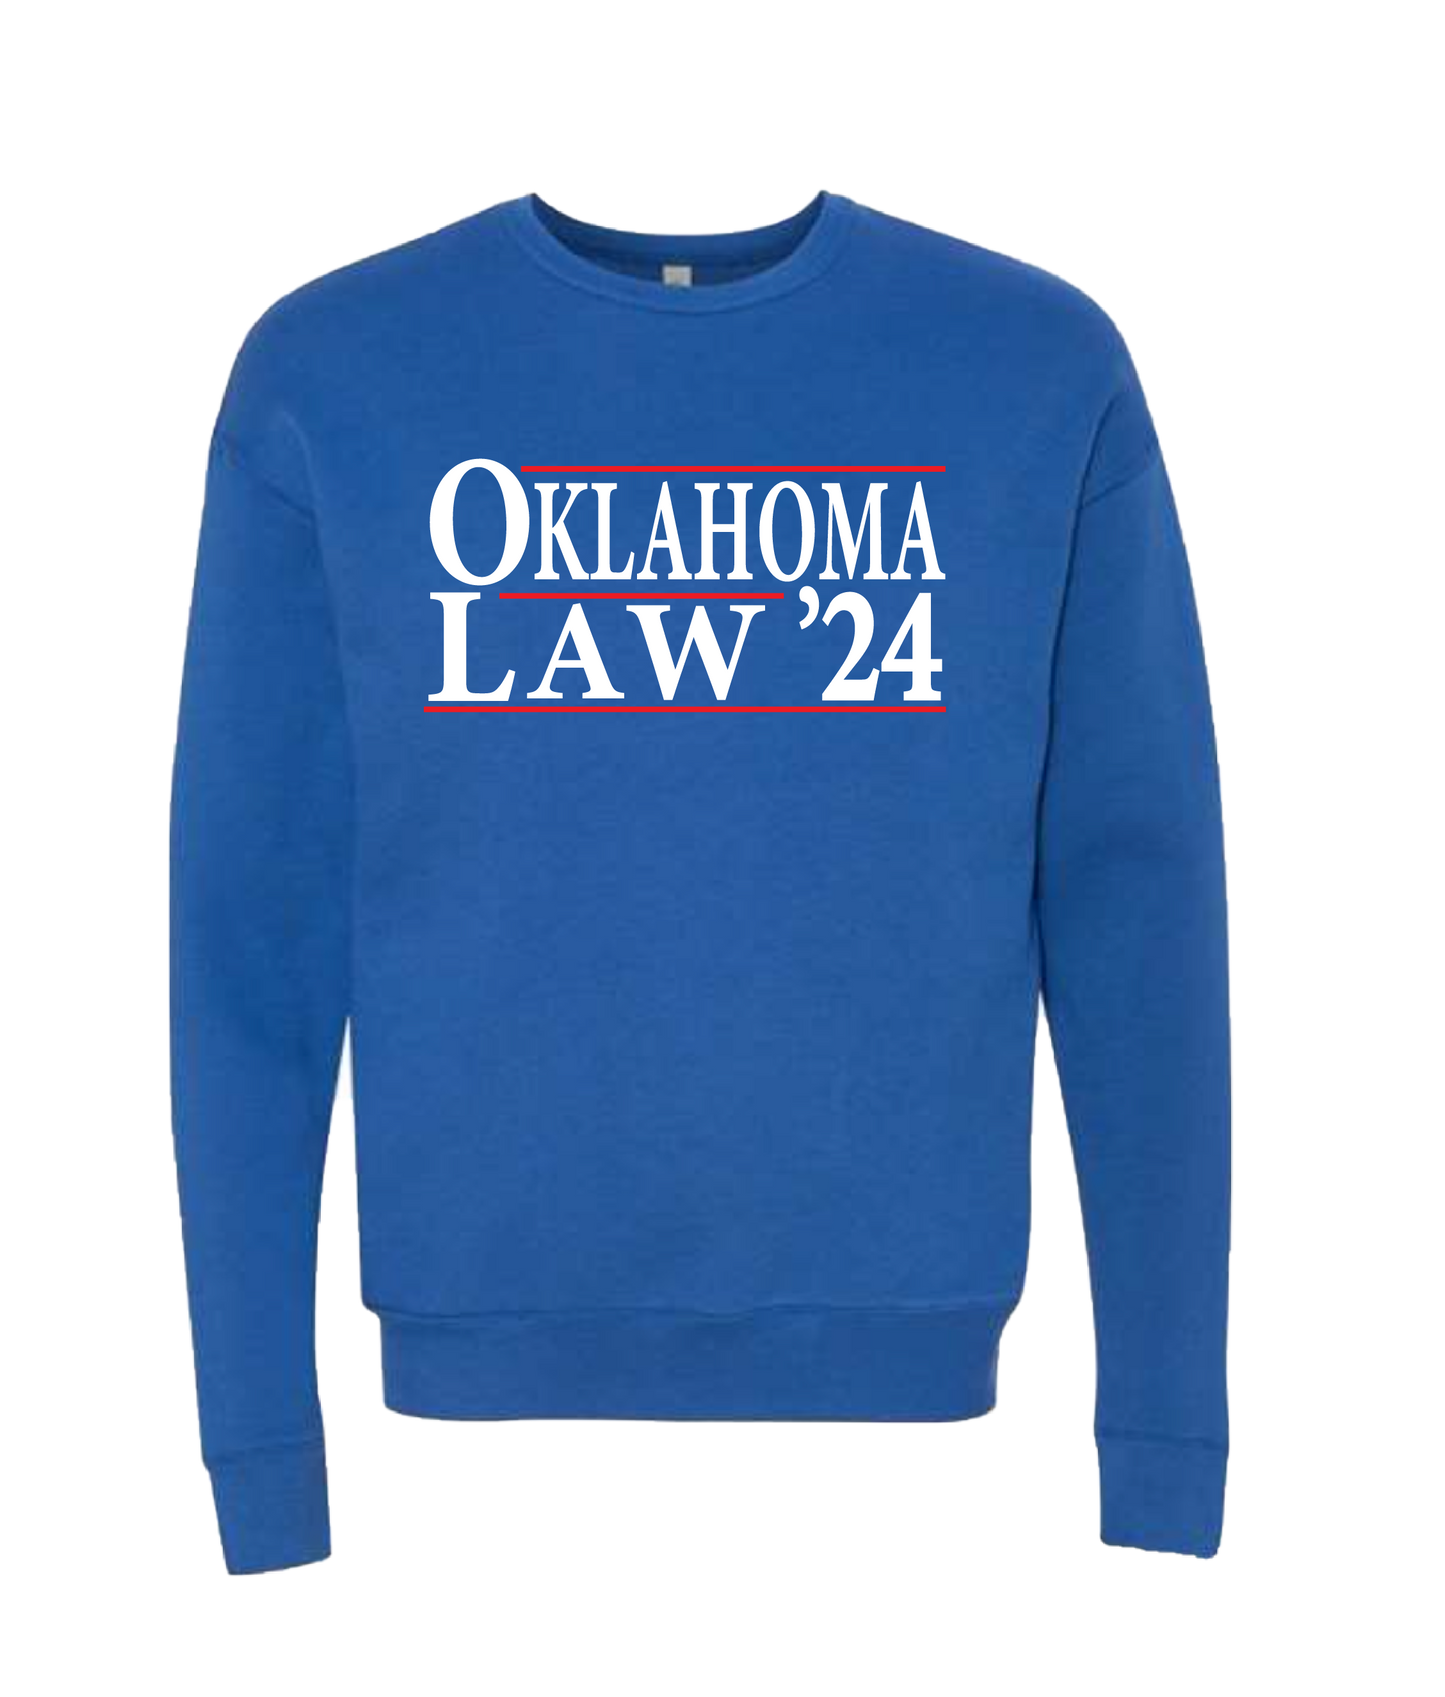 Oklahoma Law '24 campaign style (can customize year) sweatshirt